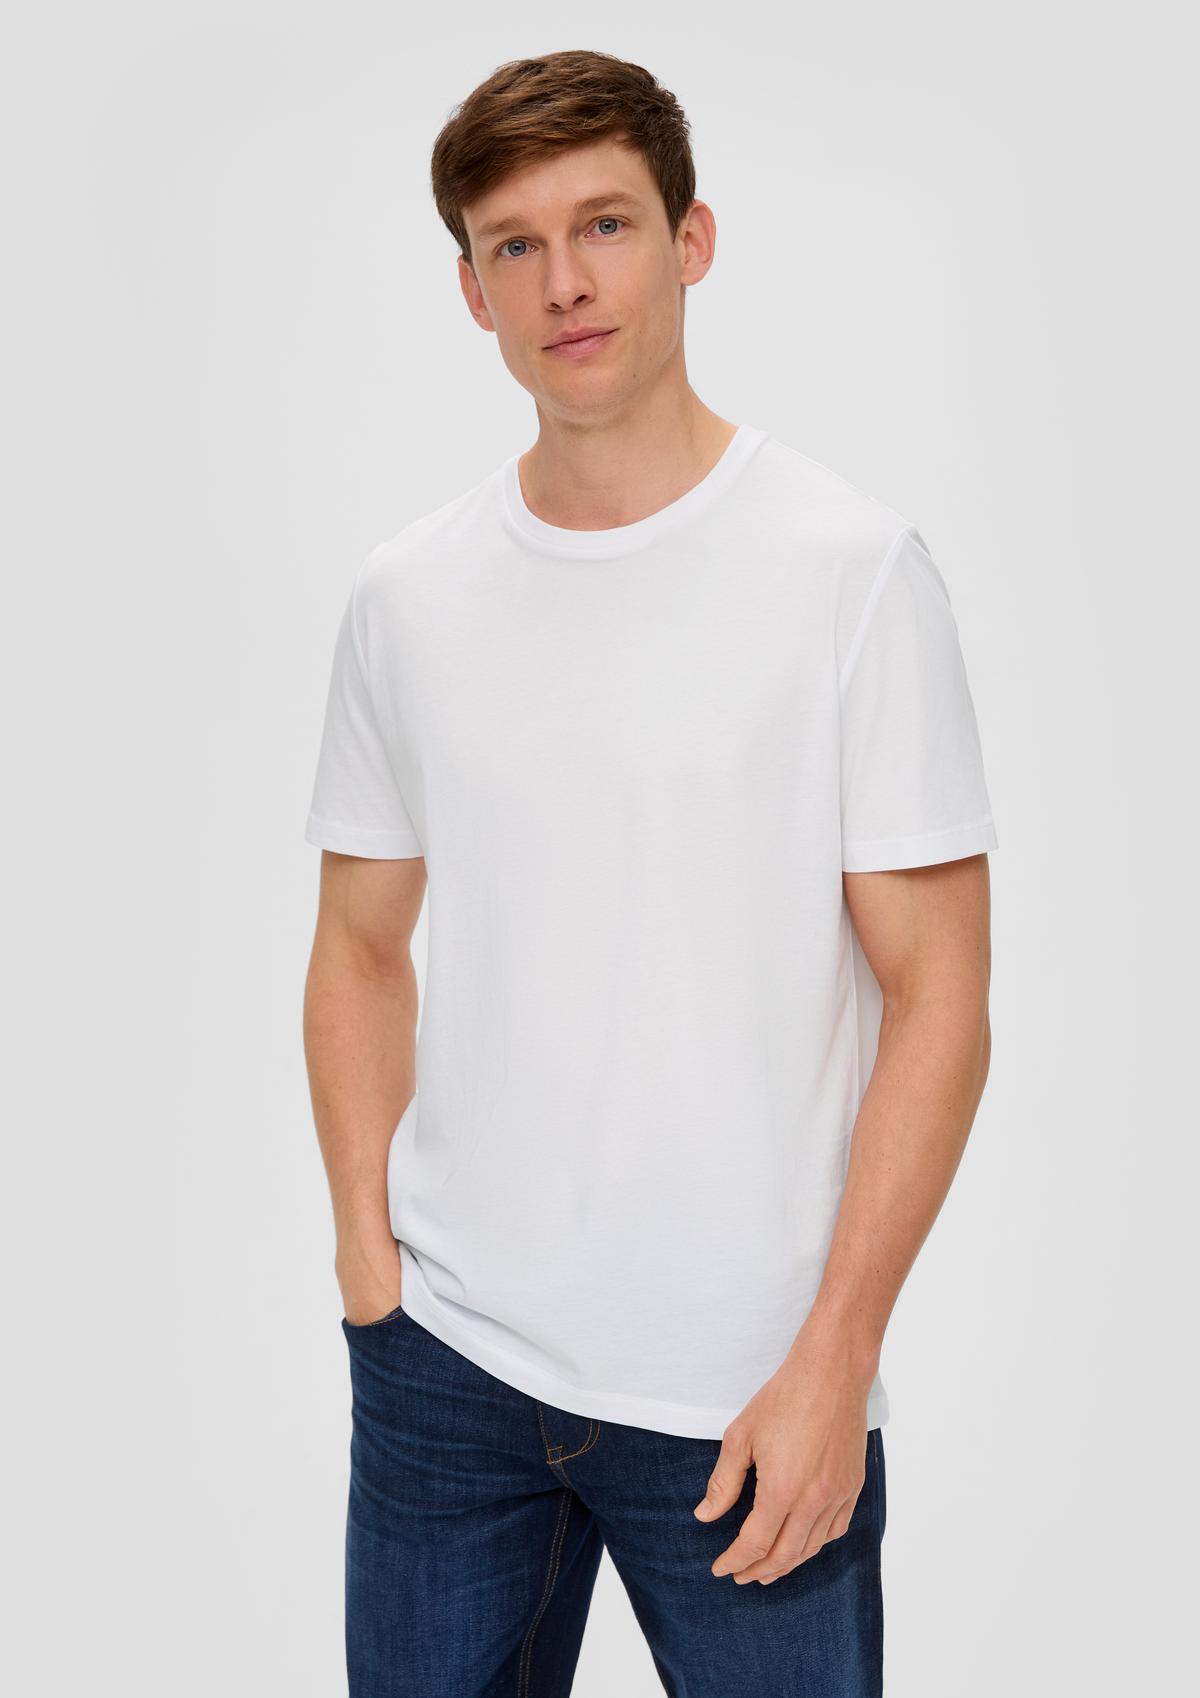 s.Oliver Cotton T-shirt in a multipack